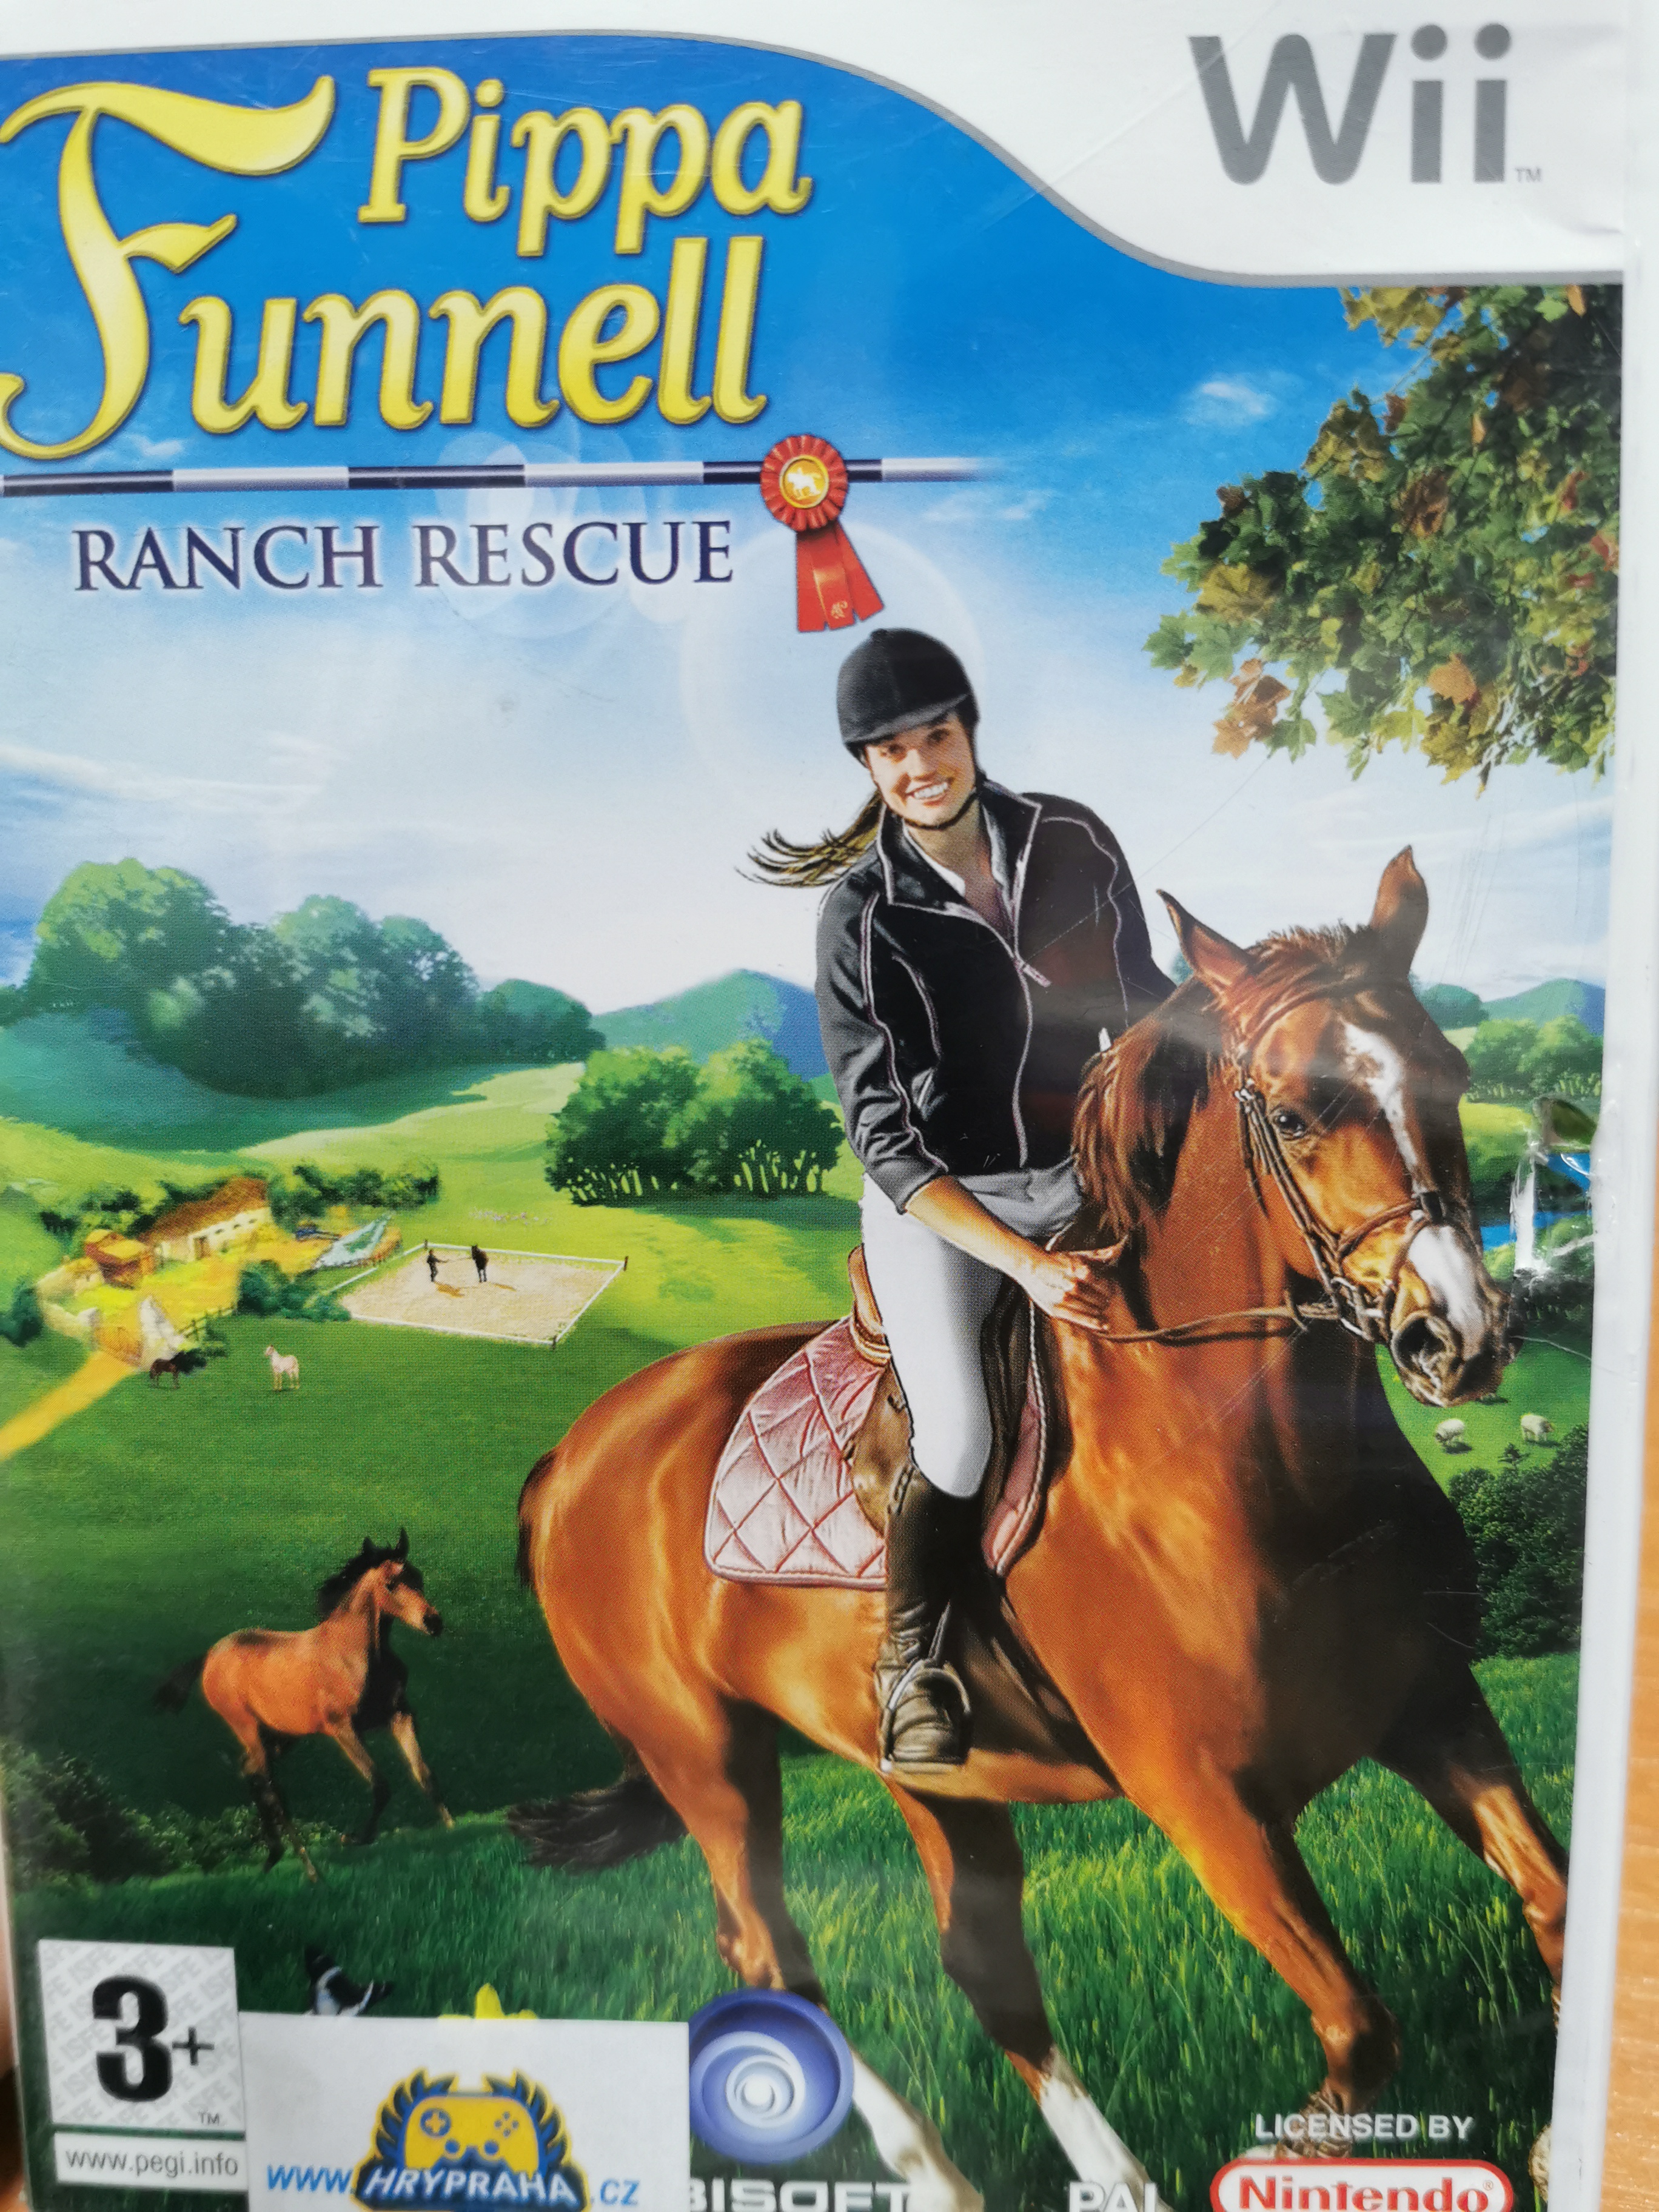 Pippa funnell ranch rescue  - Nintendo wii 